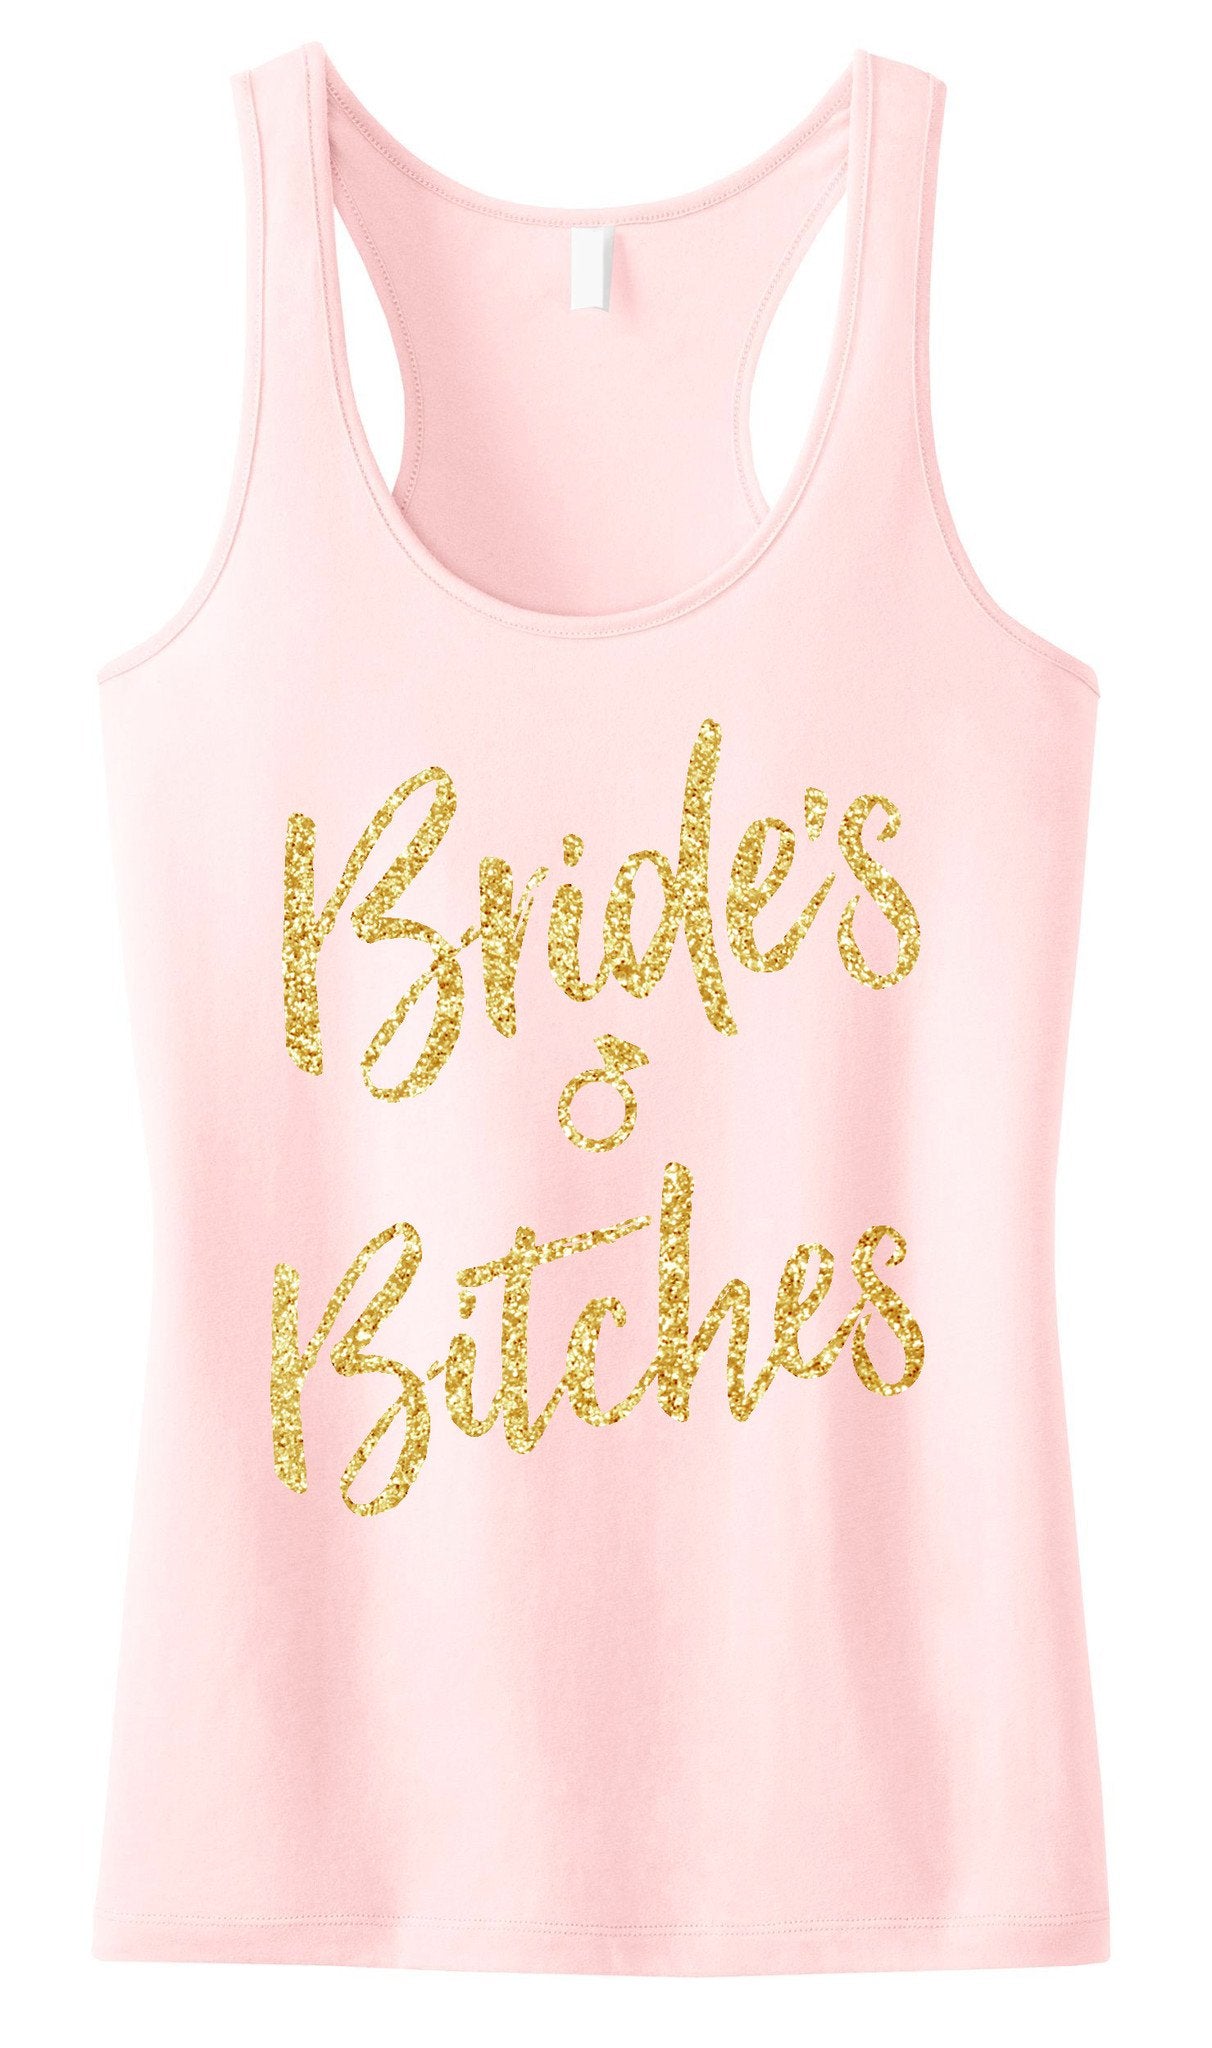 Brides Bitches Script Tank Top with Gold Glitter -